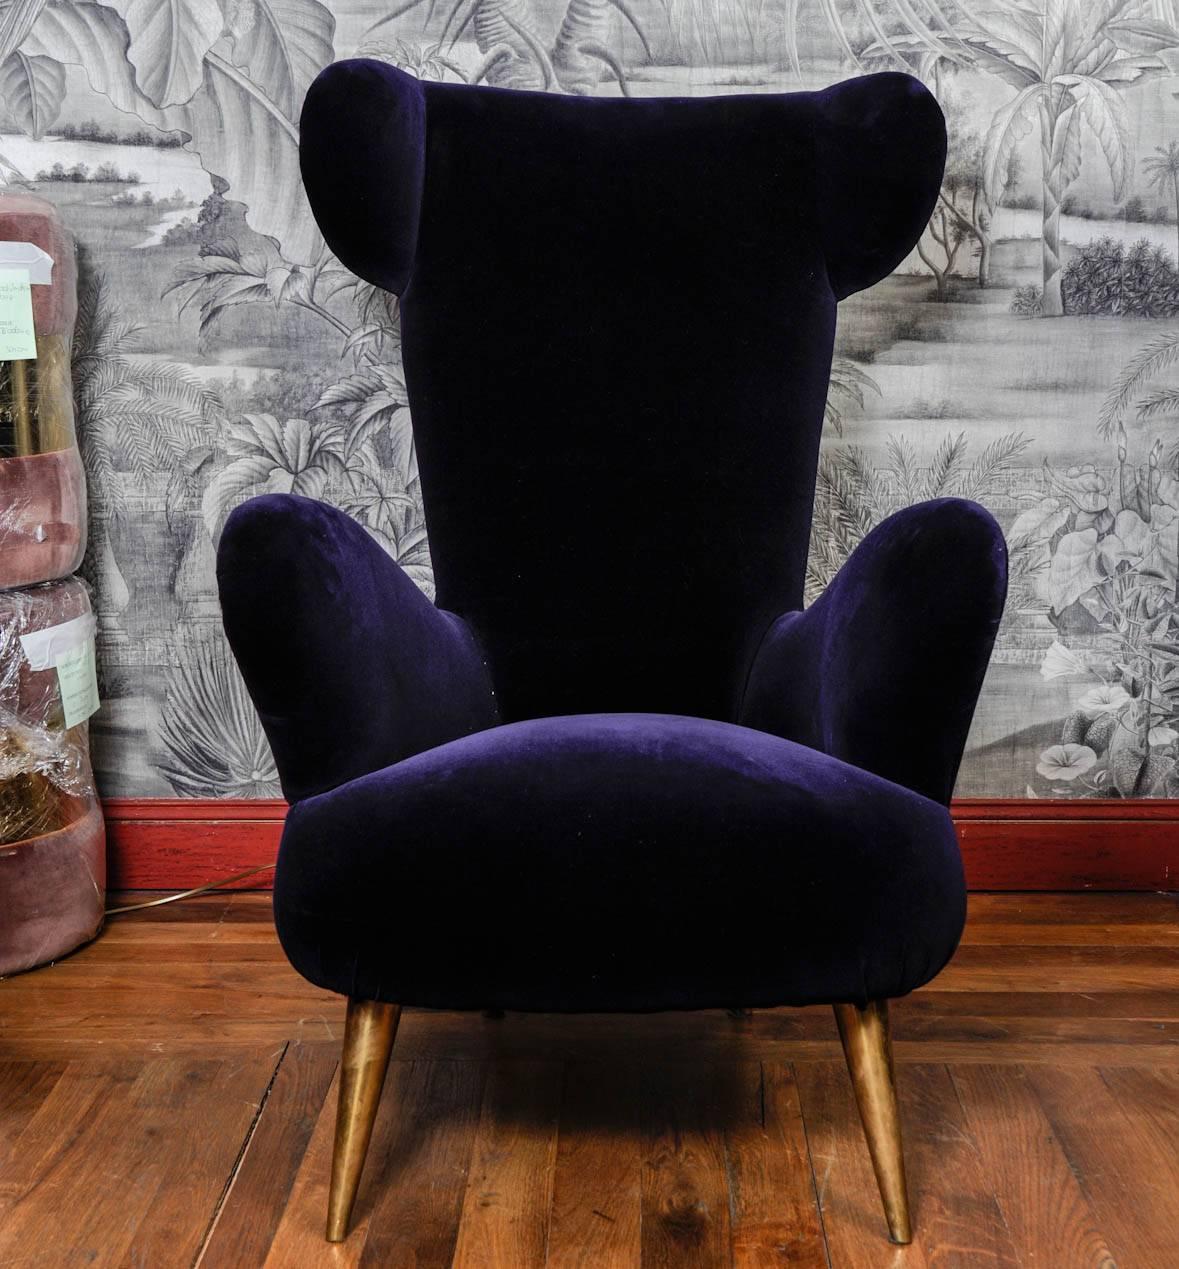 Pair of vintage wing armchairs with high back, four brass legs, upholstered with purple velvet.